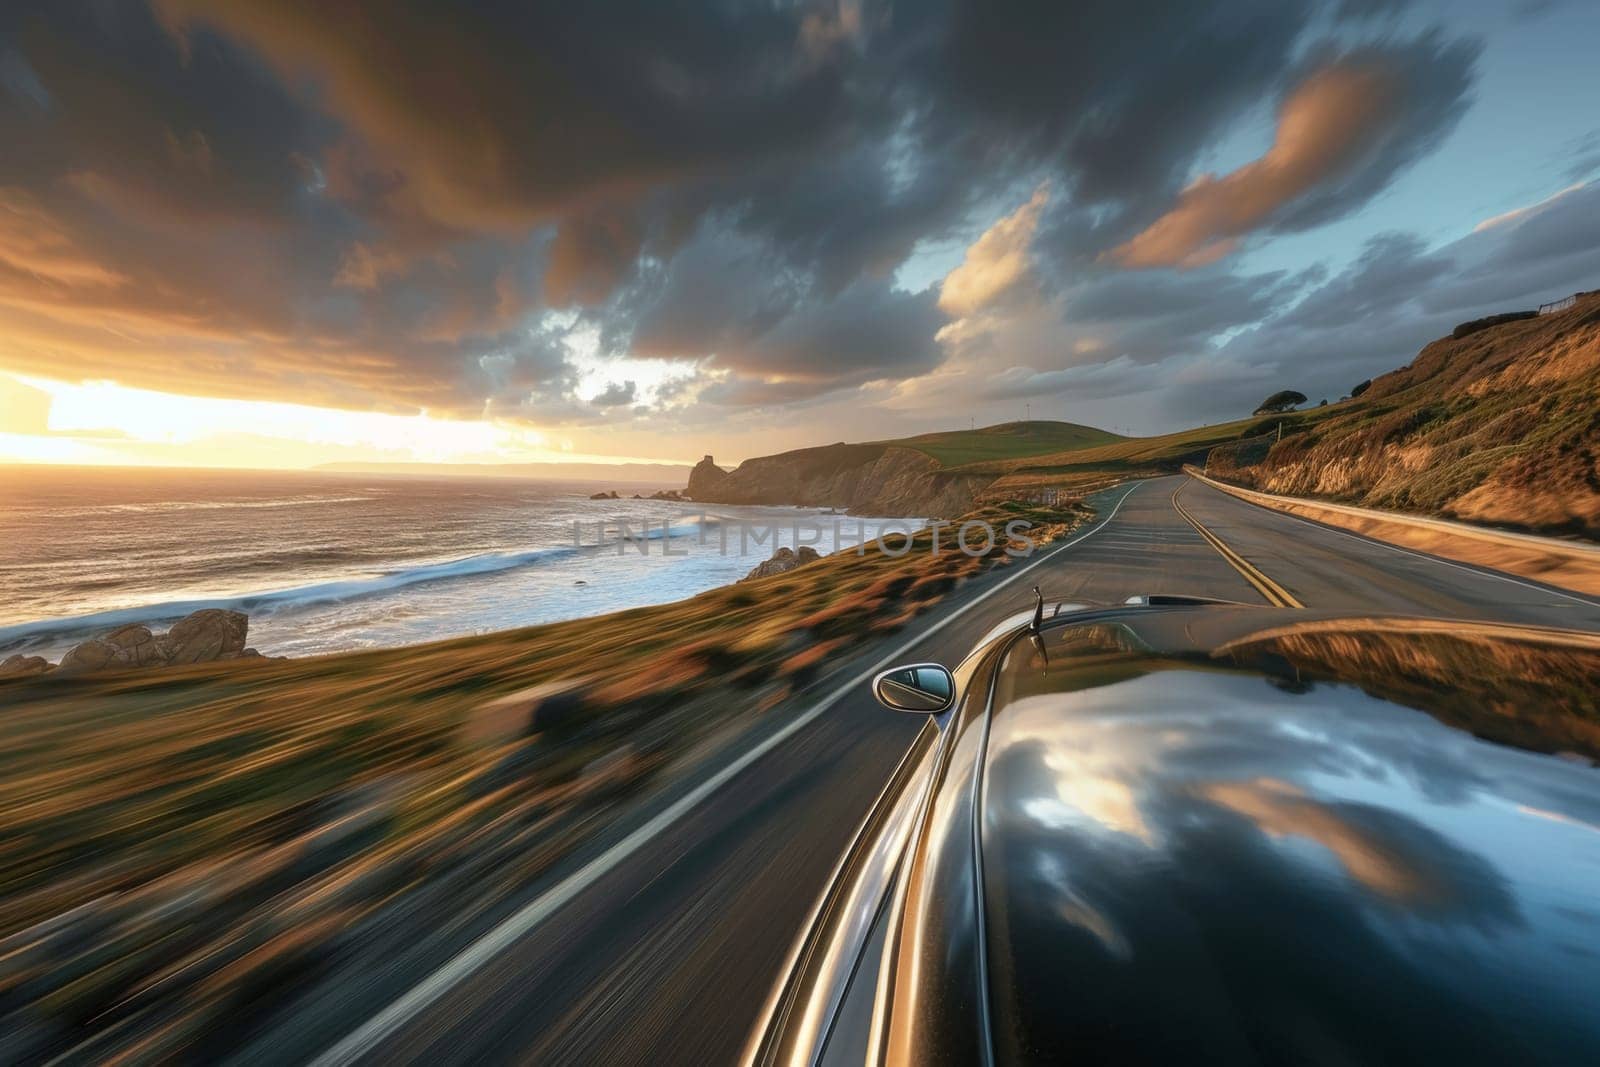 A convertible car racing along a beautiful coastal route, the golden hour sun casting warm light on an open road trip